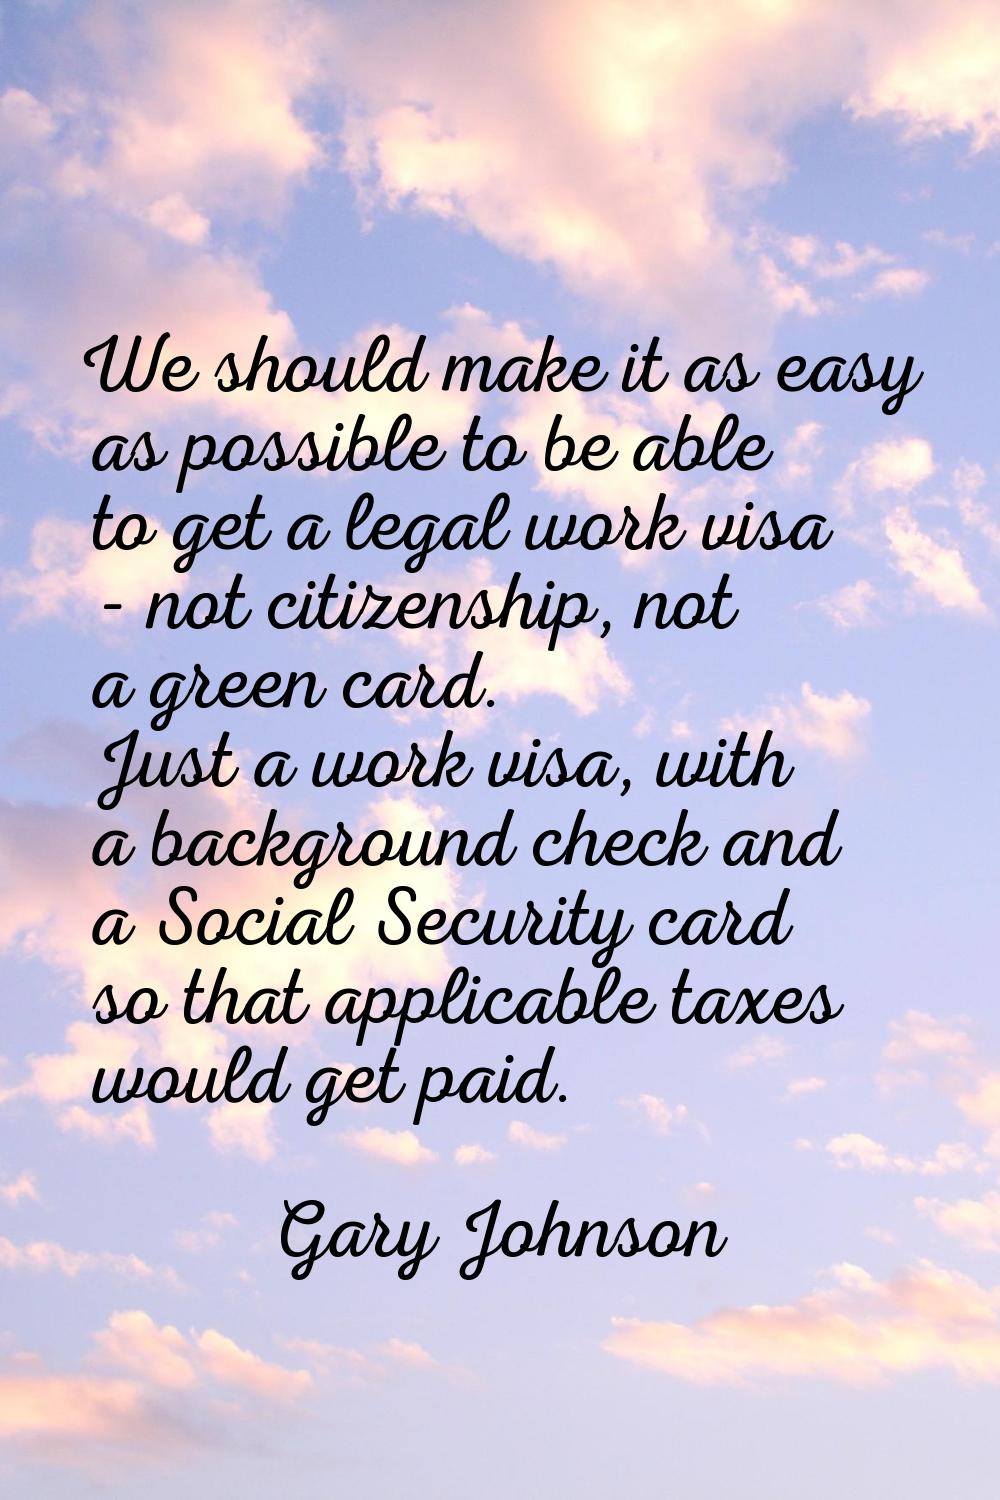 We should make it as easy as possible to be able to get a legal work visa - not citizenship, not a 